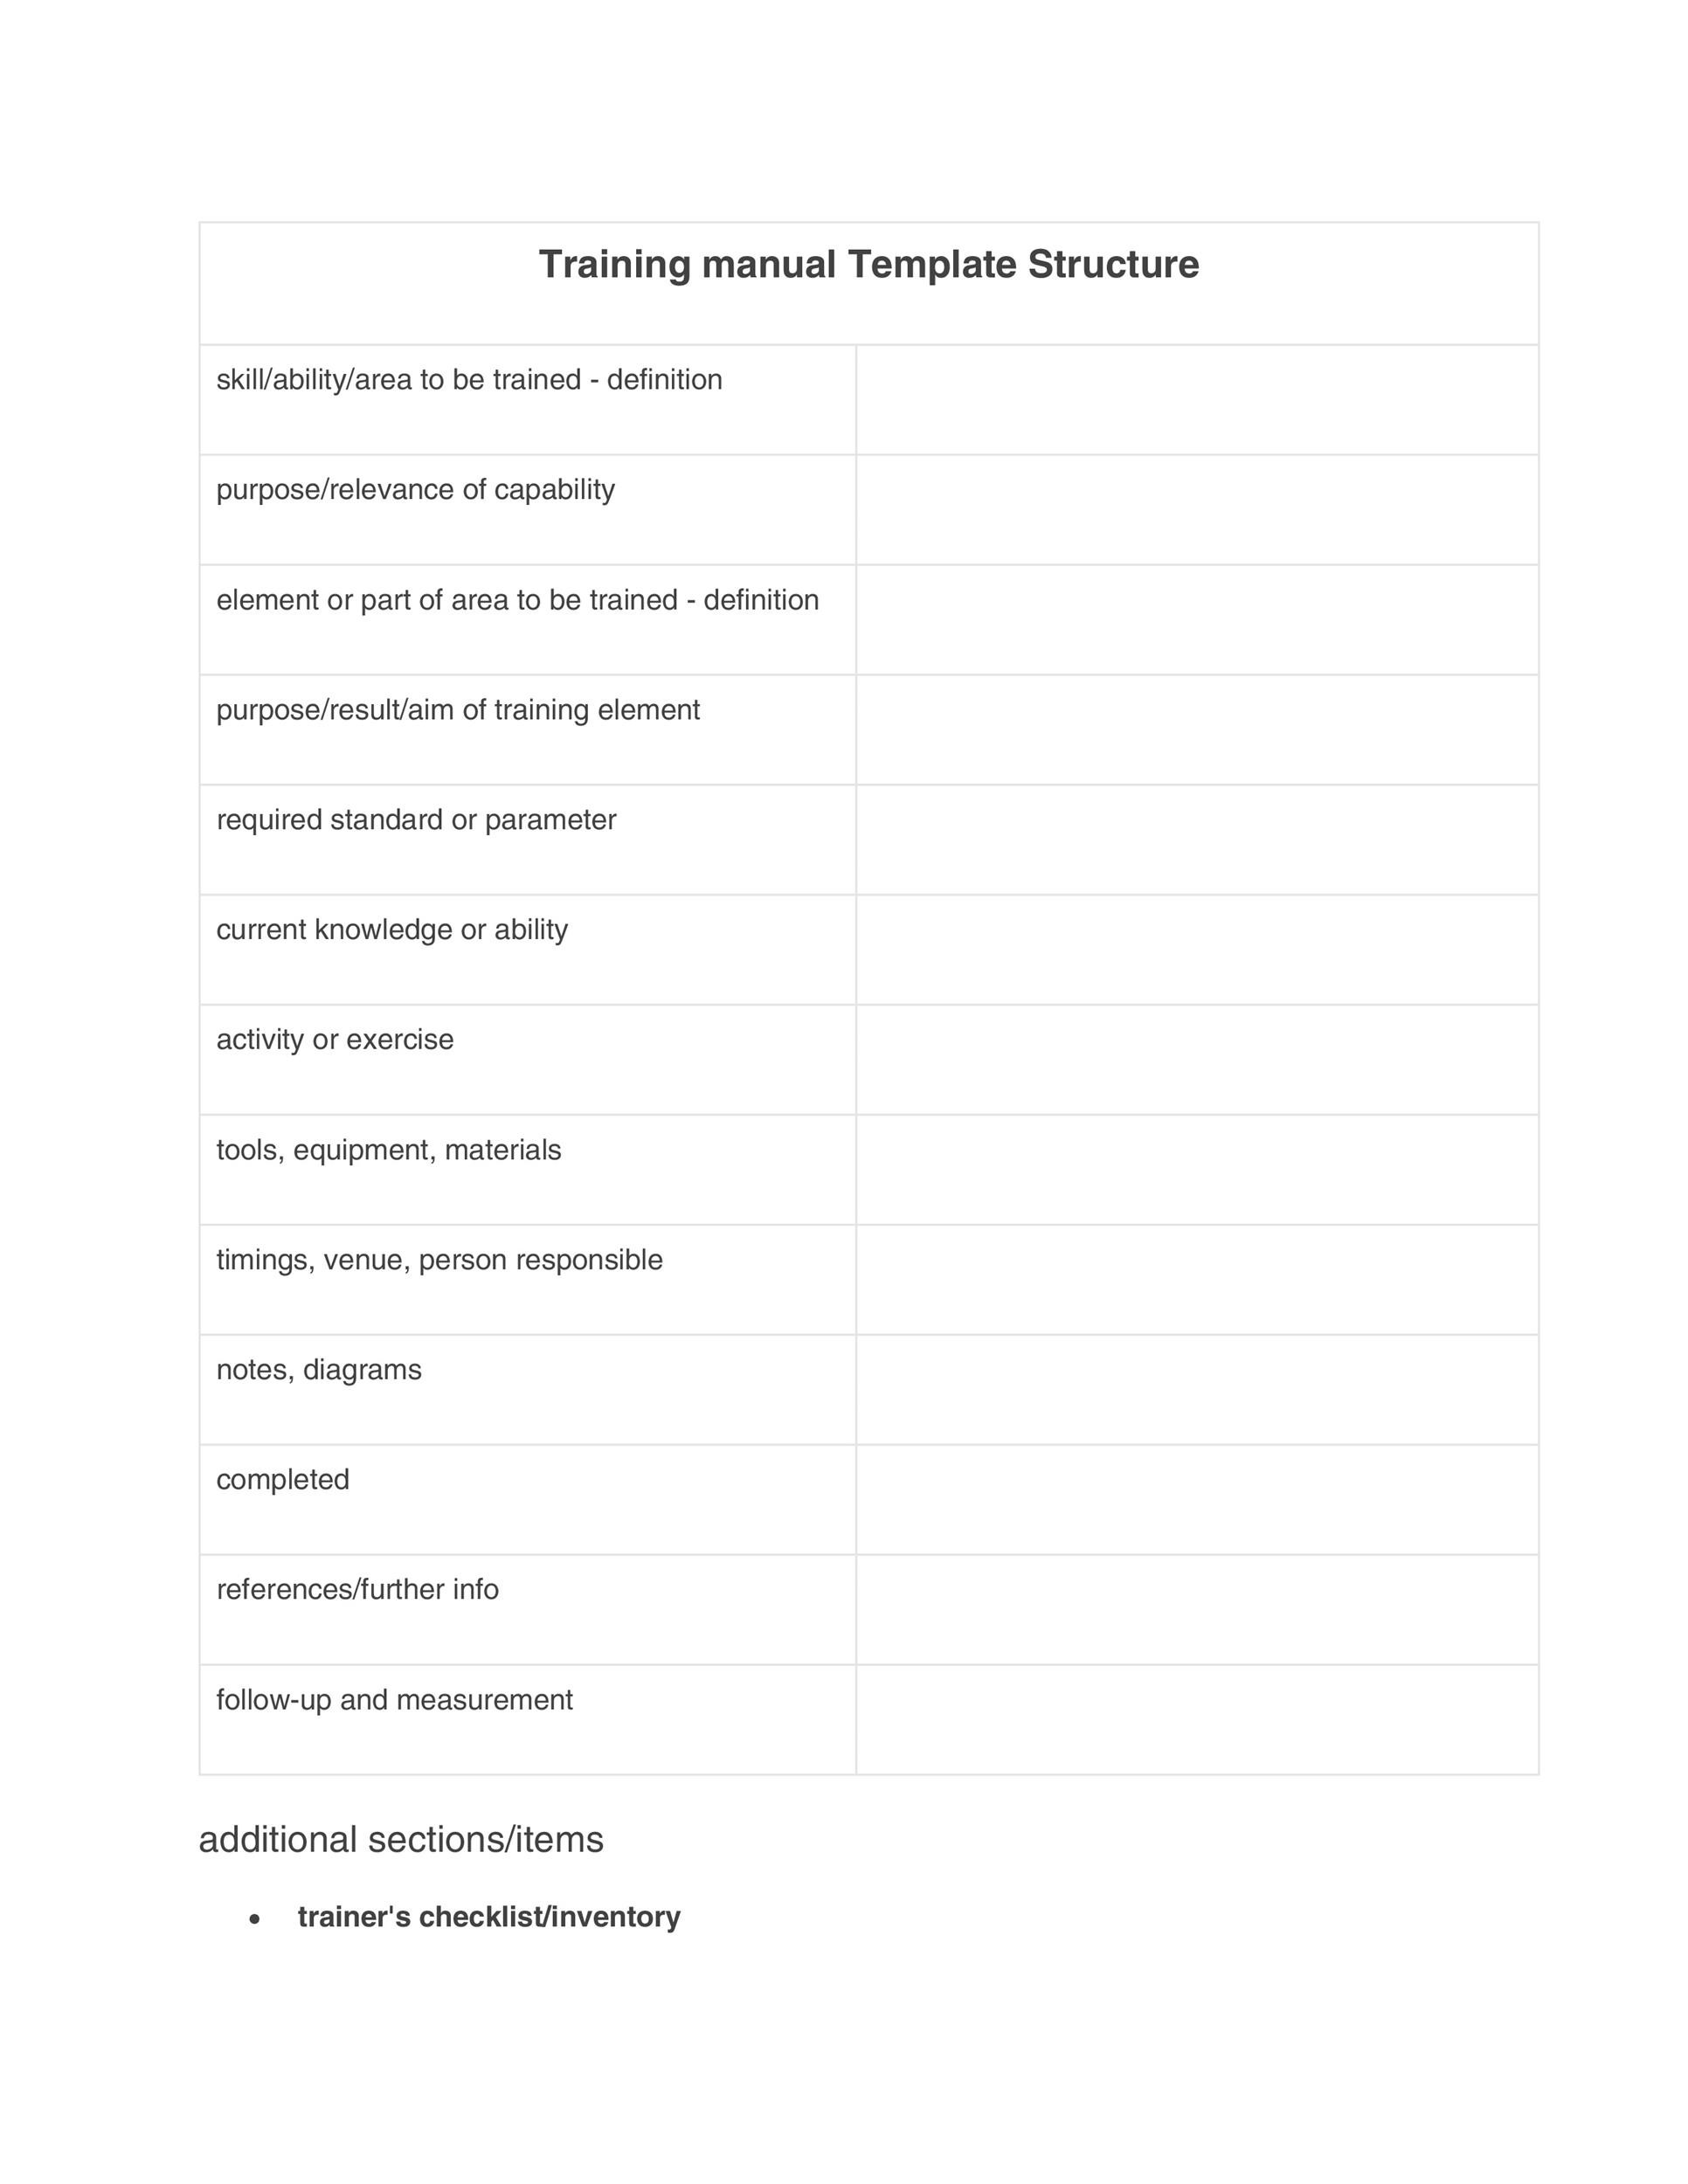 Training Manual Format In Word